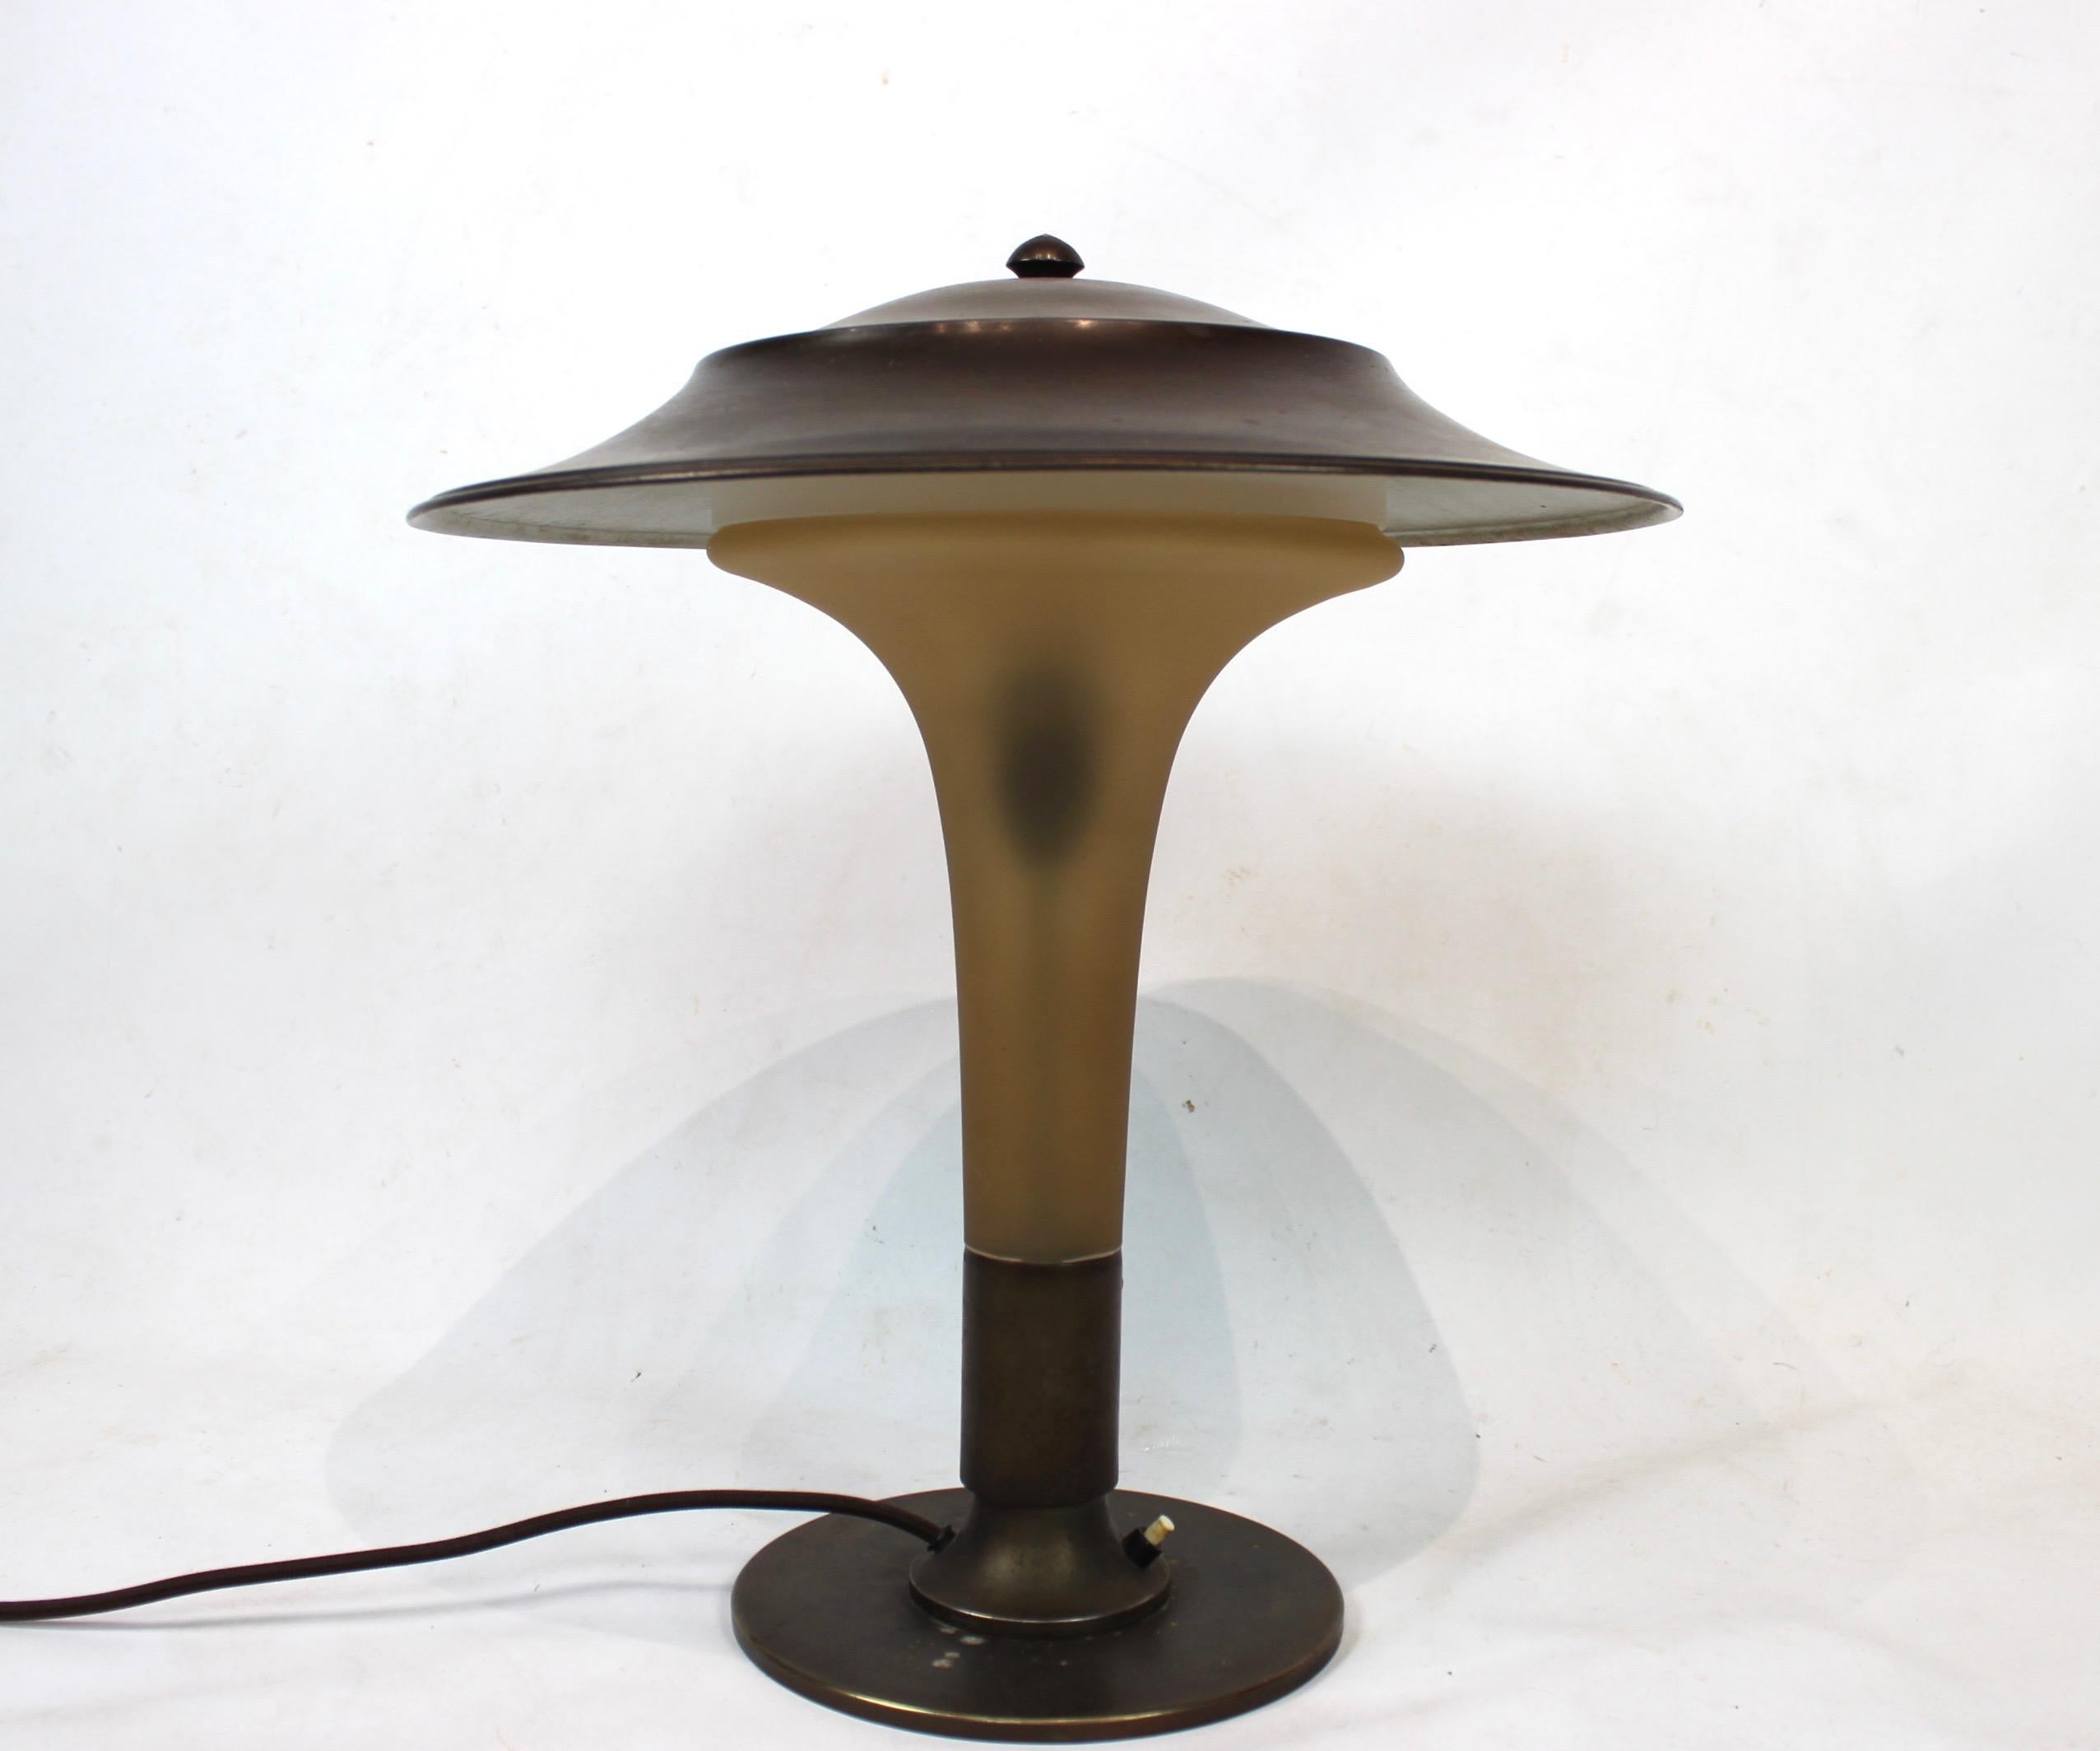 Scandinavian Modern Torch Lamp with Stem of Amber Colored Glass, by Fog & Mørup, 1930s